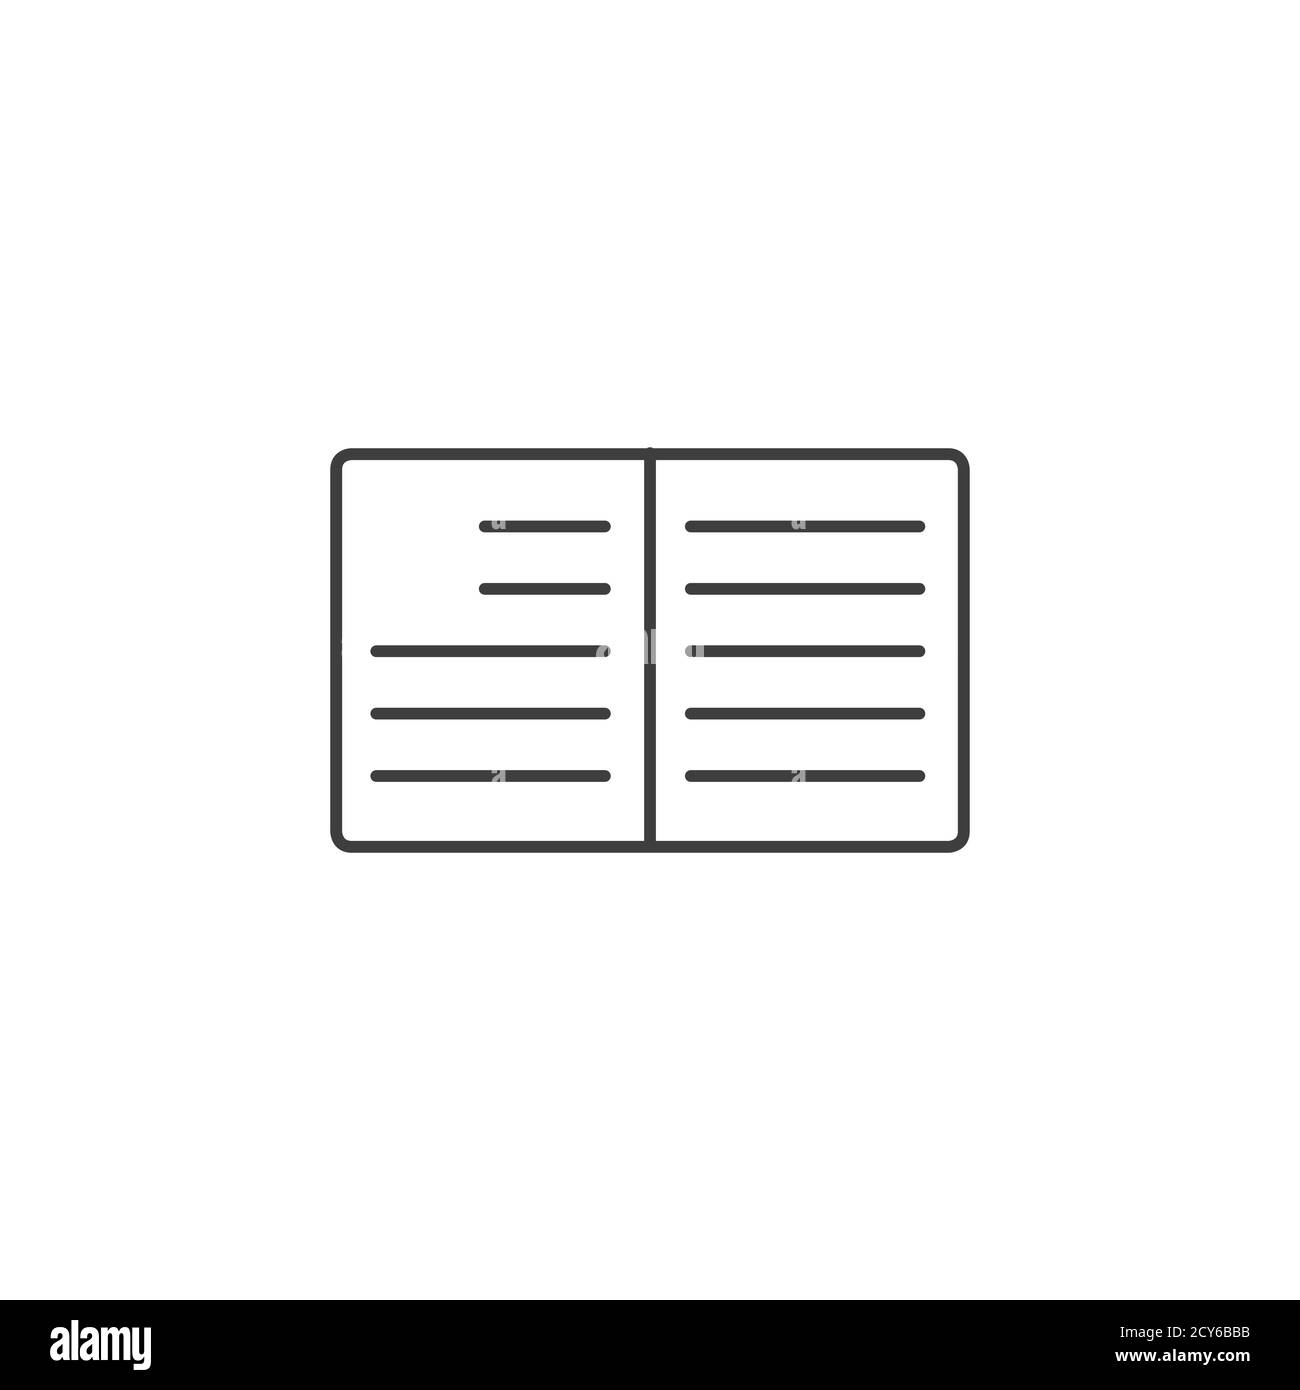 Student journal line icon. open book, workbook icon. Stock vector illustration isolated on white background. Stock Vector